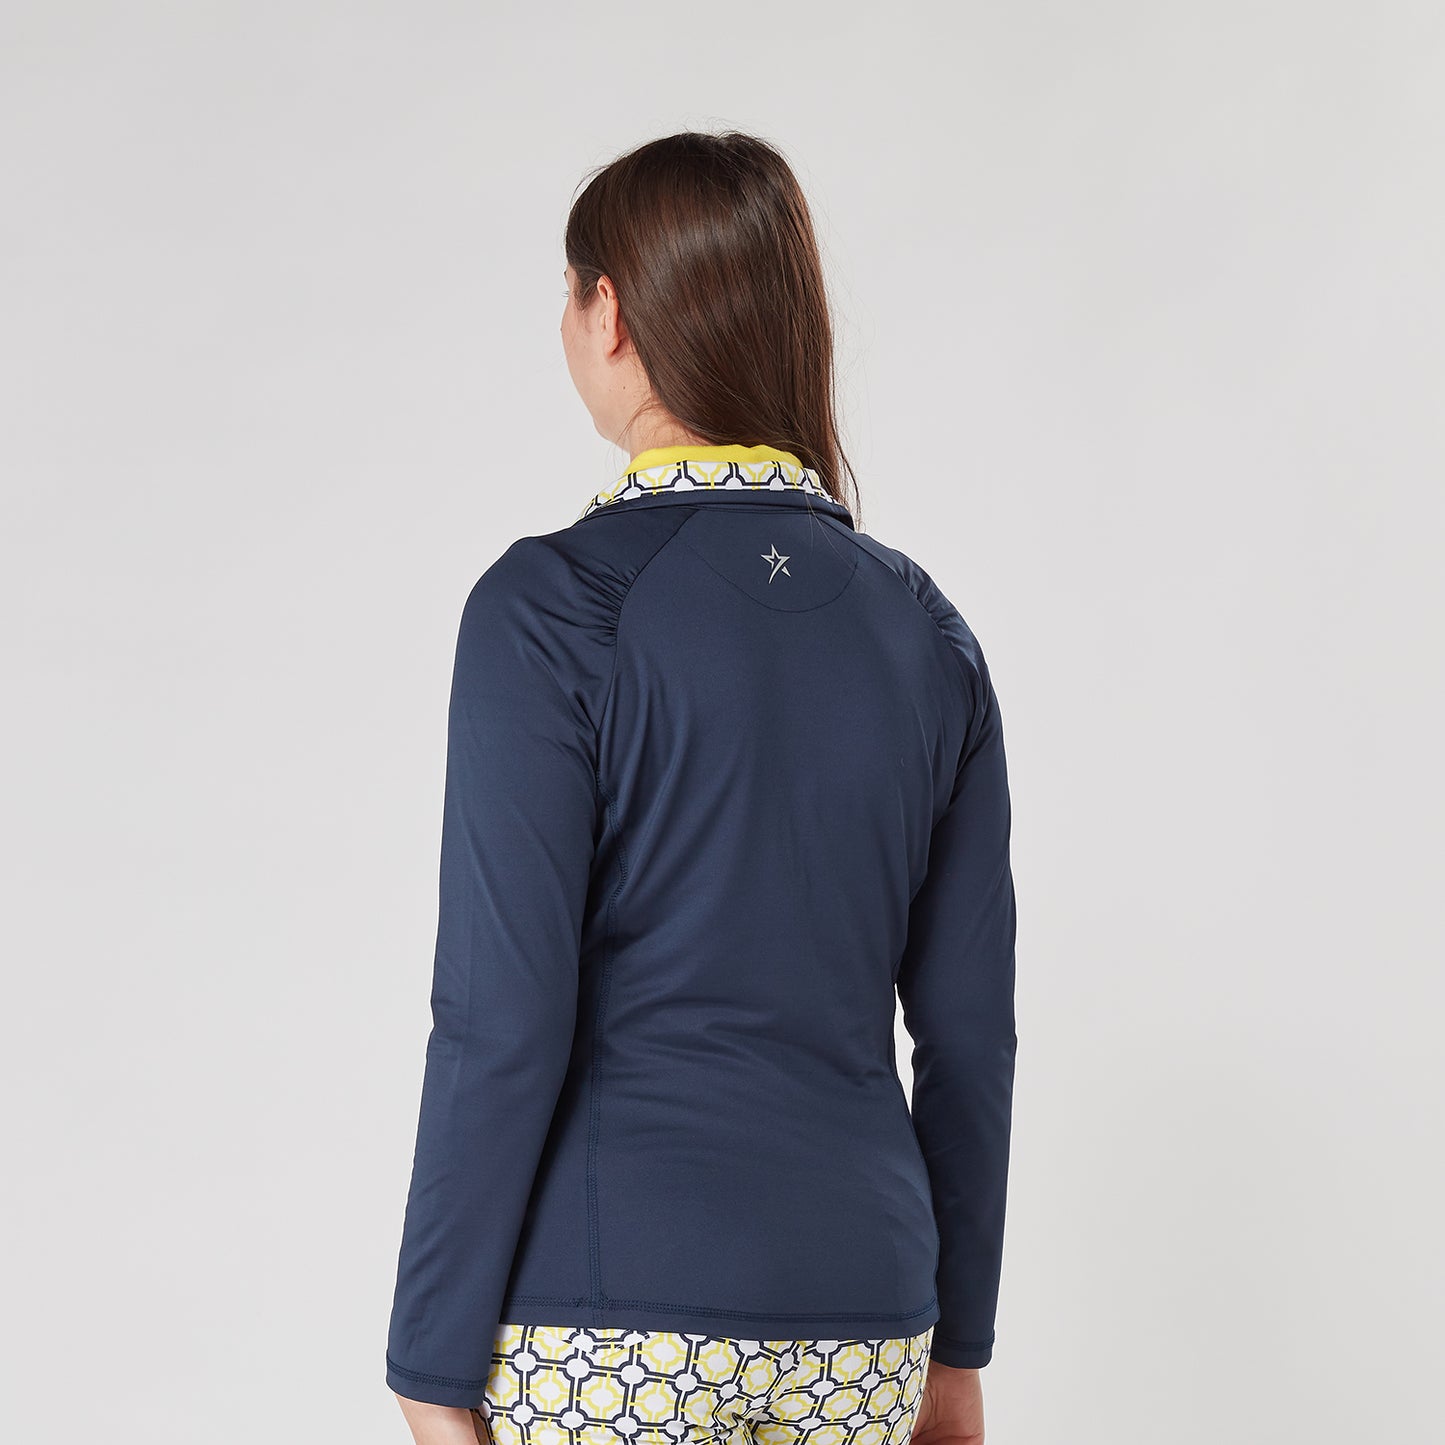 Swing Out Sister Women's Zip-Neck Top in Navy and Sunshine